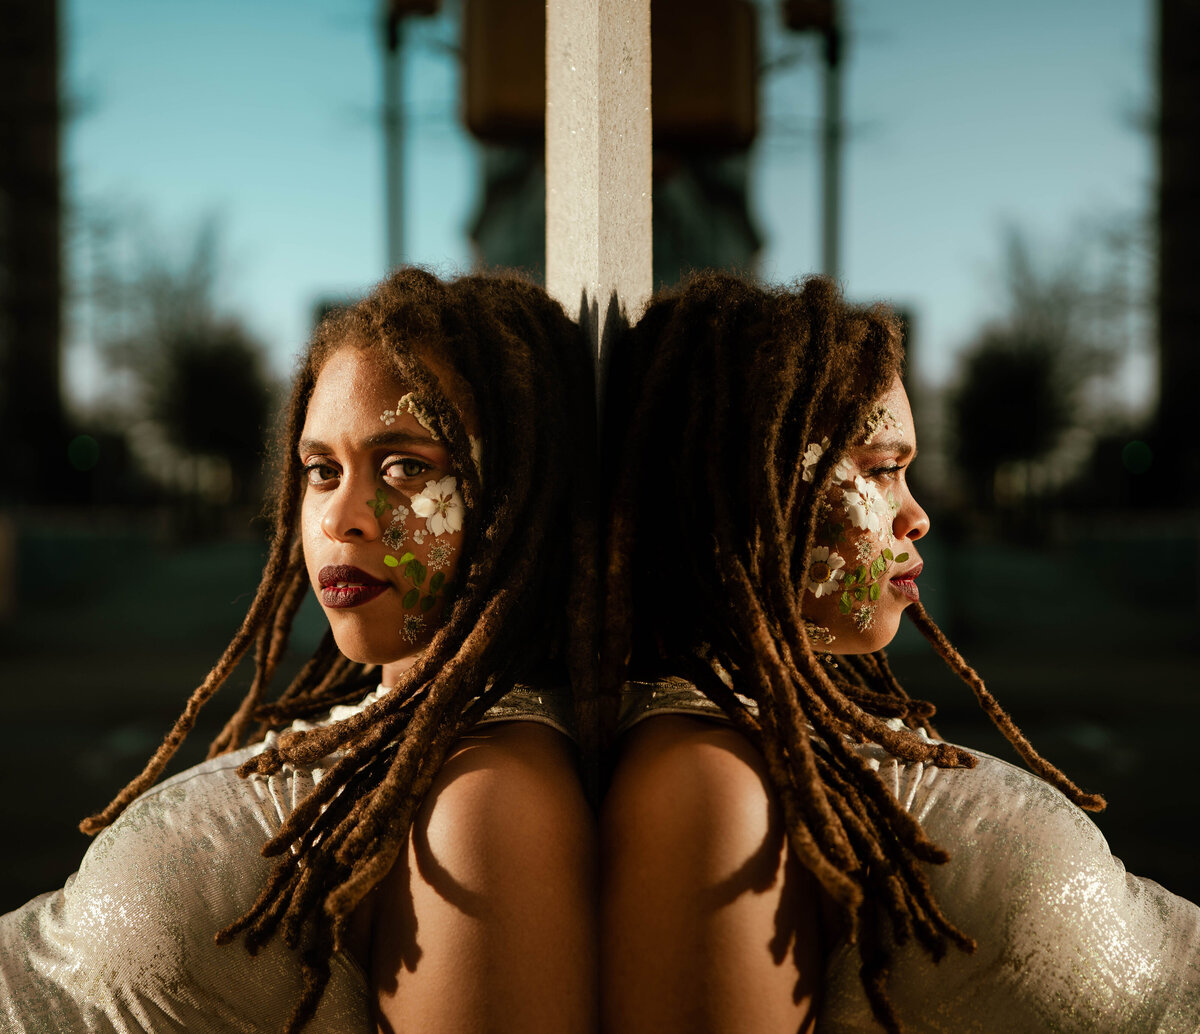 Bang-Images-Diptychs-and-Double-Exposures